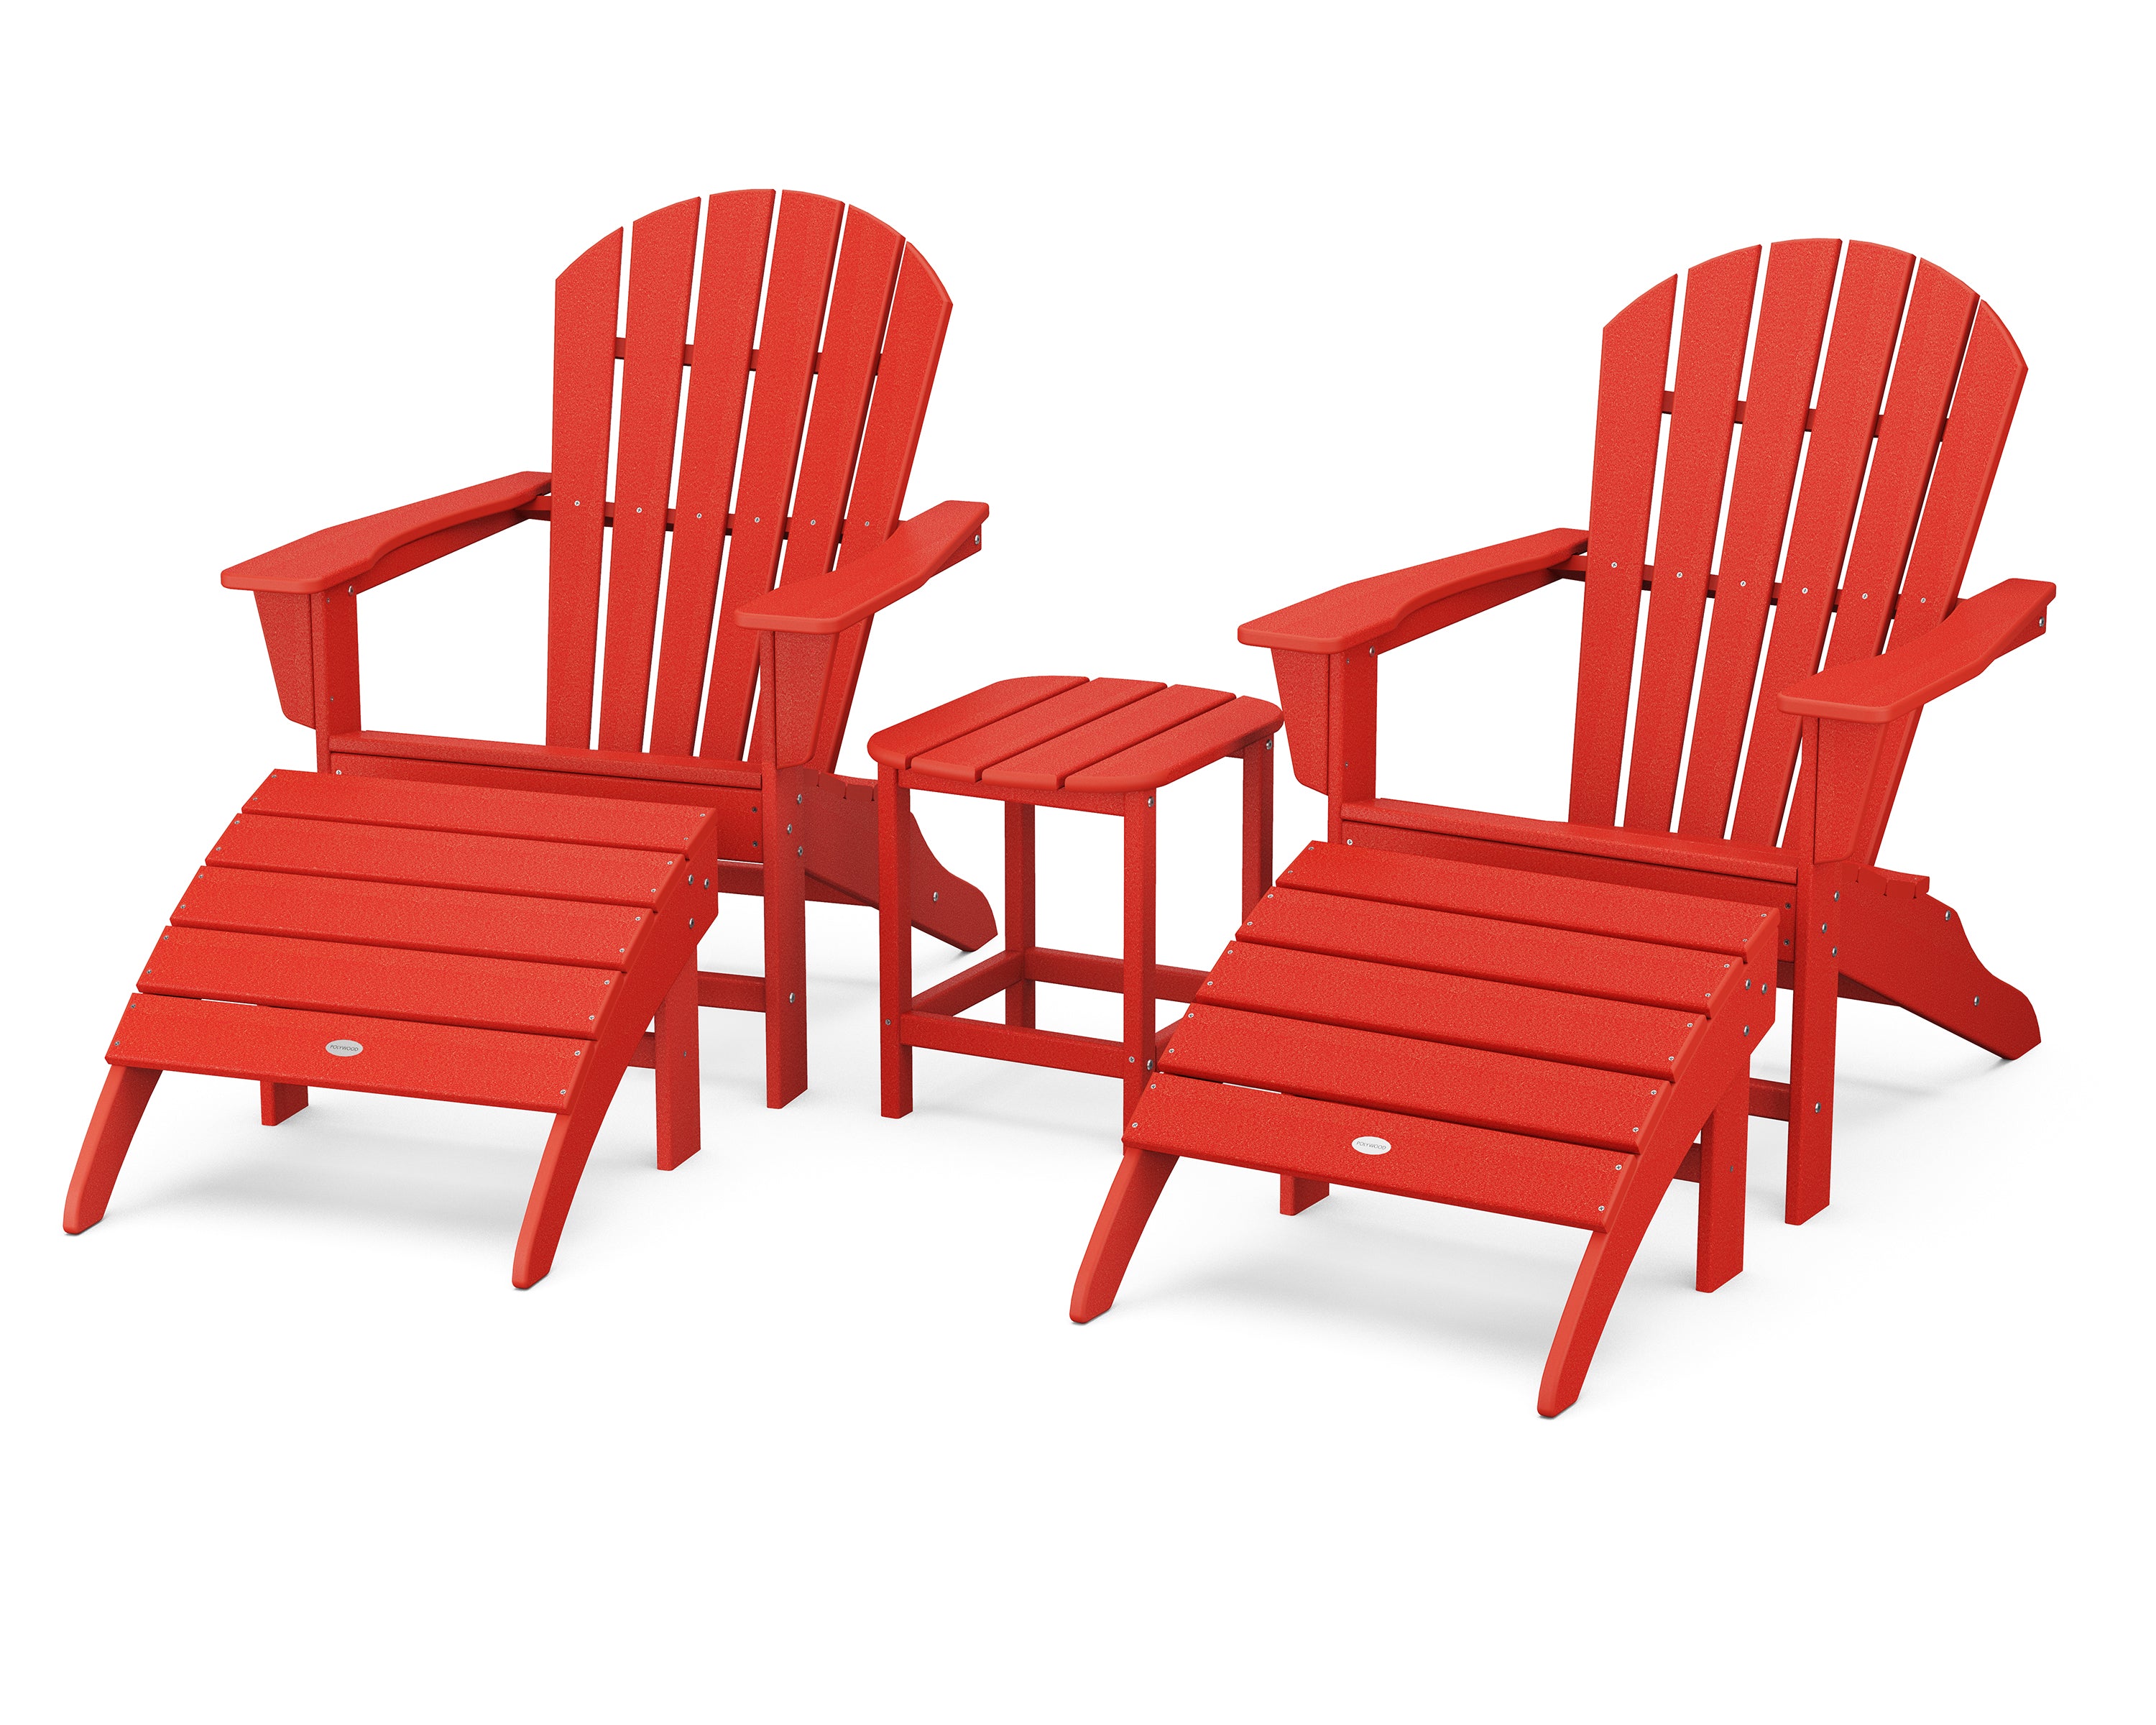 POLYWOOD® South Beach Adirondack 5-Piece Set in Sunset Red